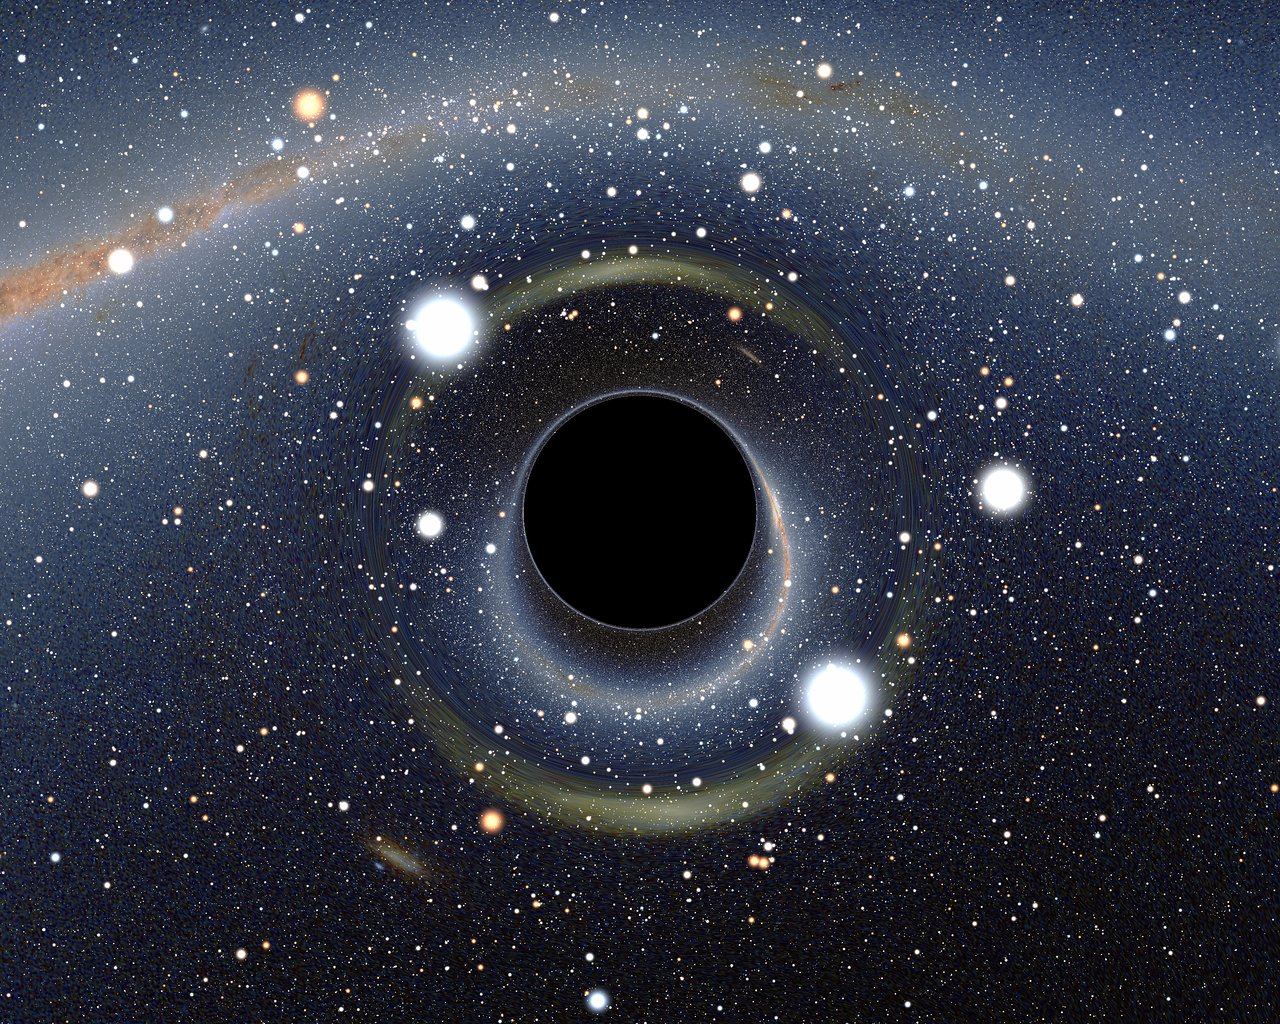 A star transformed into a black hole instead of exploding